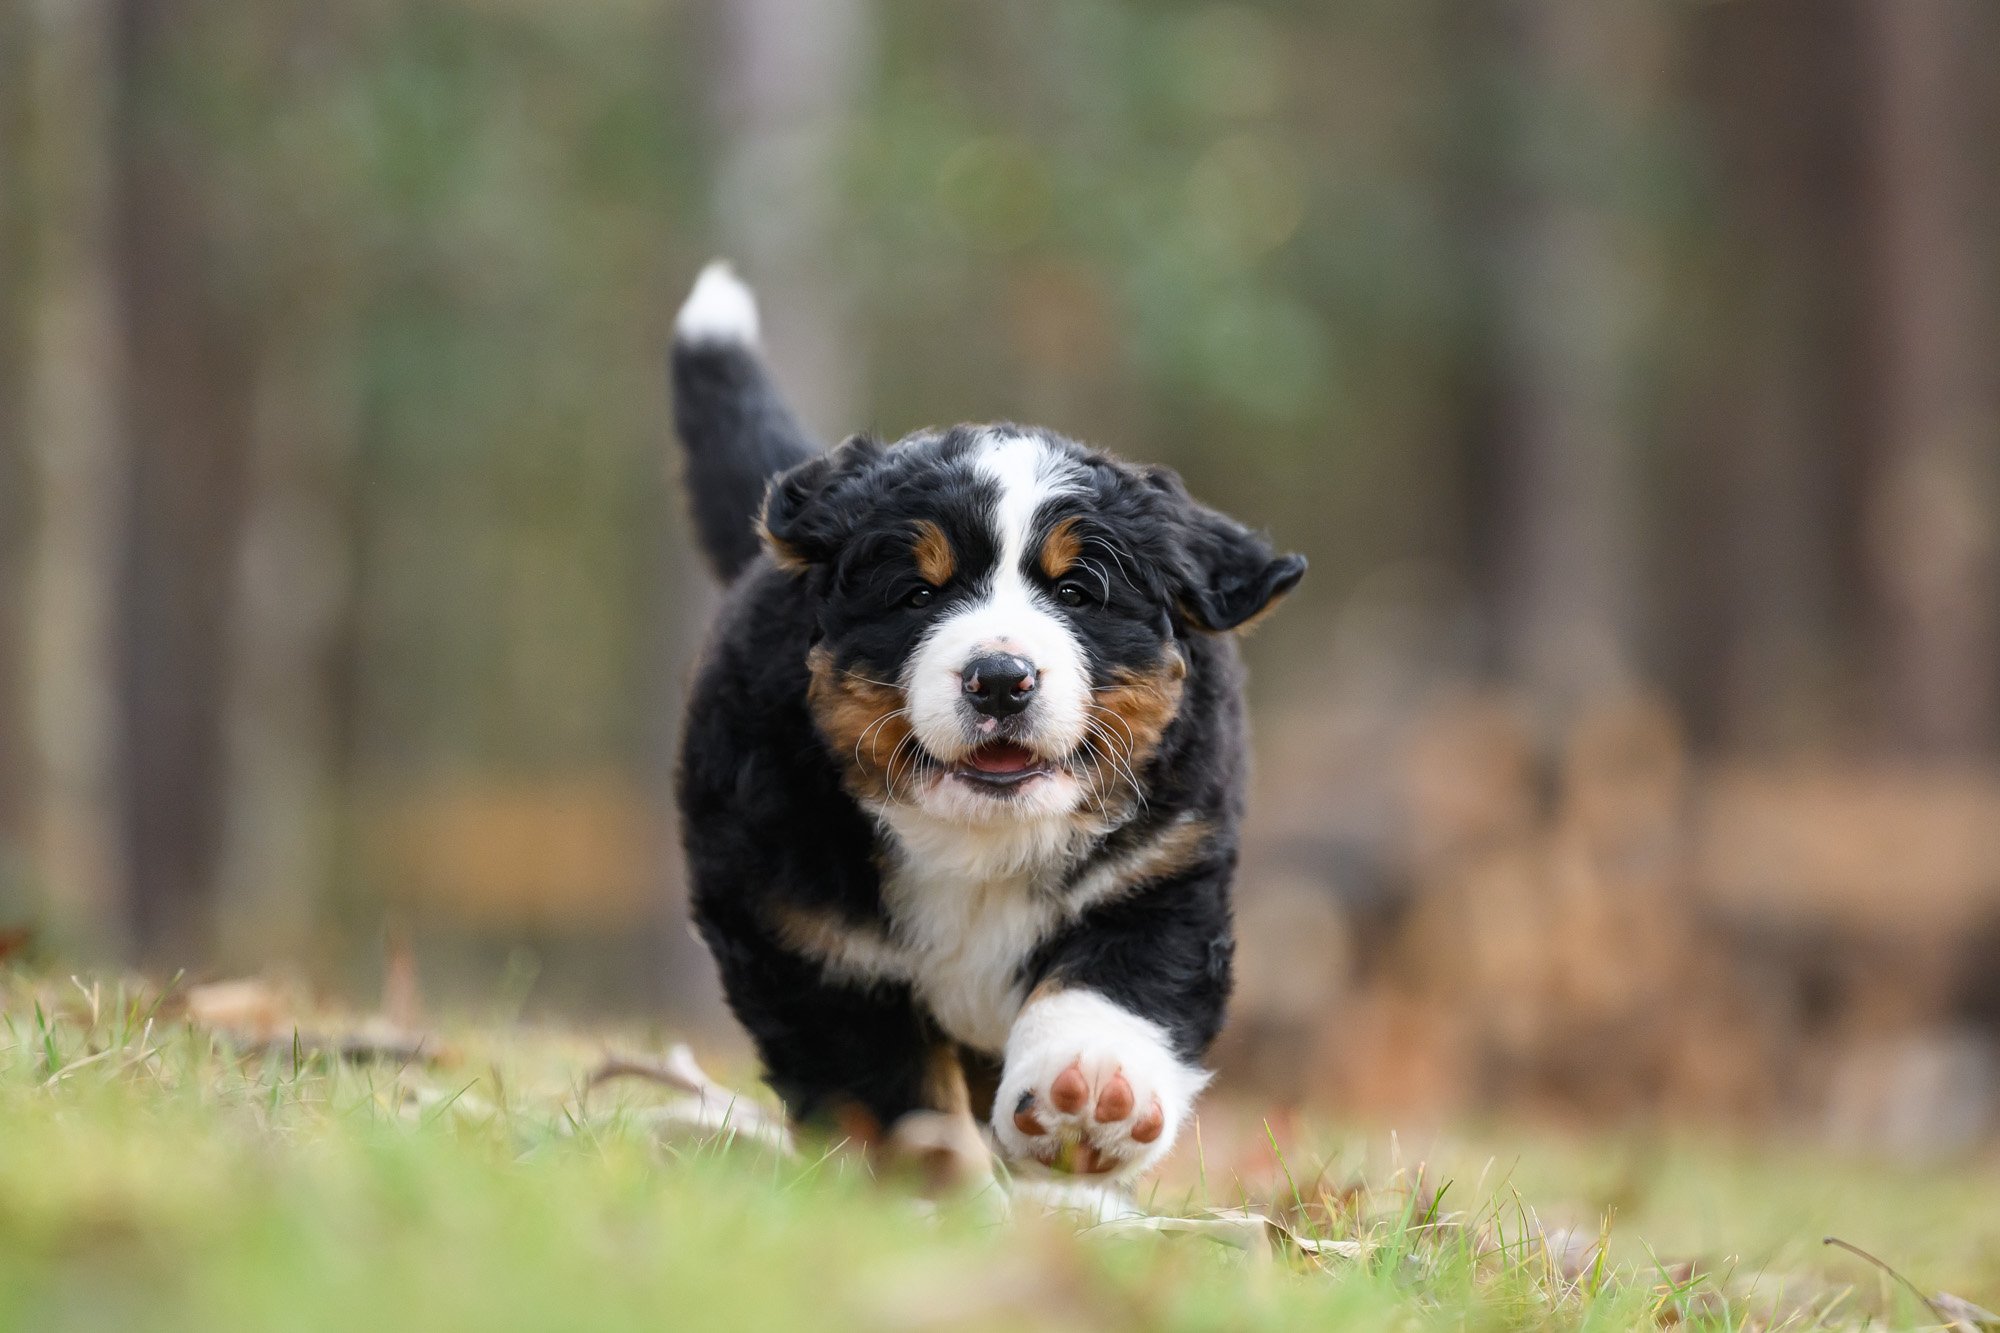 6 week old bernese mountain dog puppy showing toe beans as running